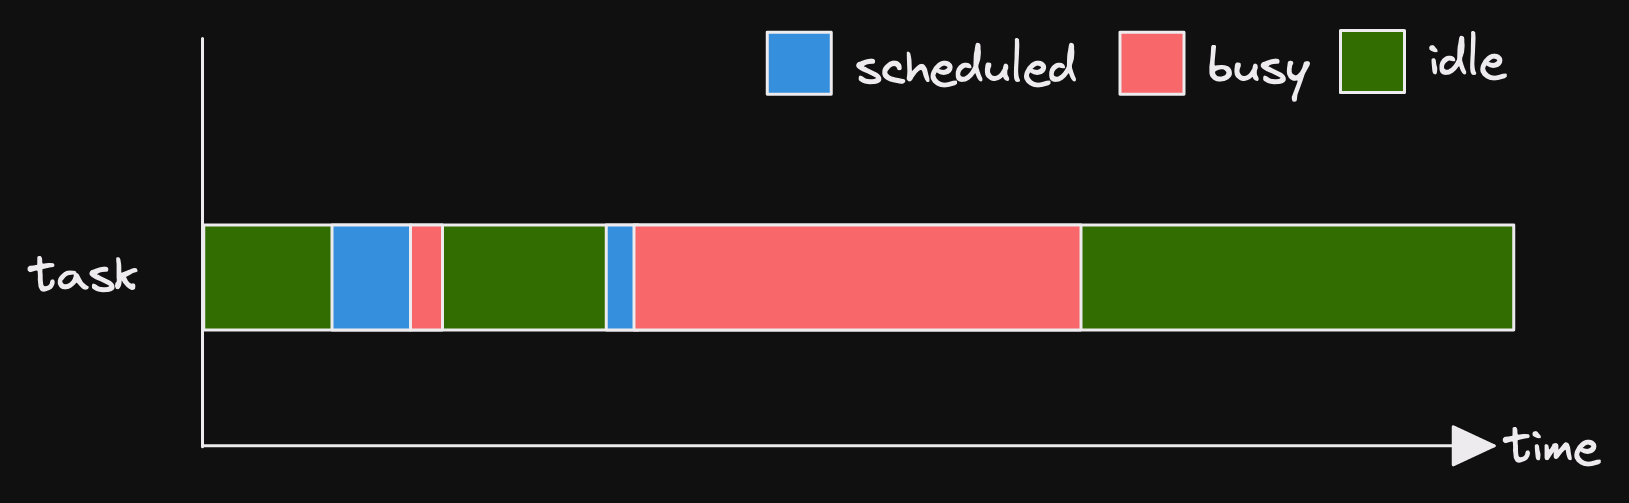 Time-status diagram showing 1 task in one of 3 states: idle, scheduled, busy.